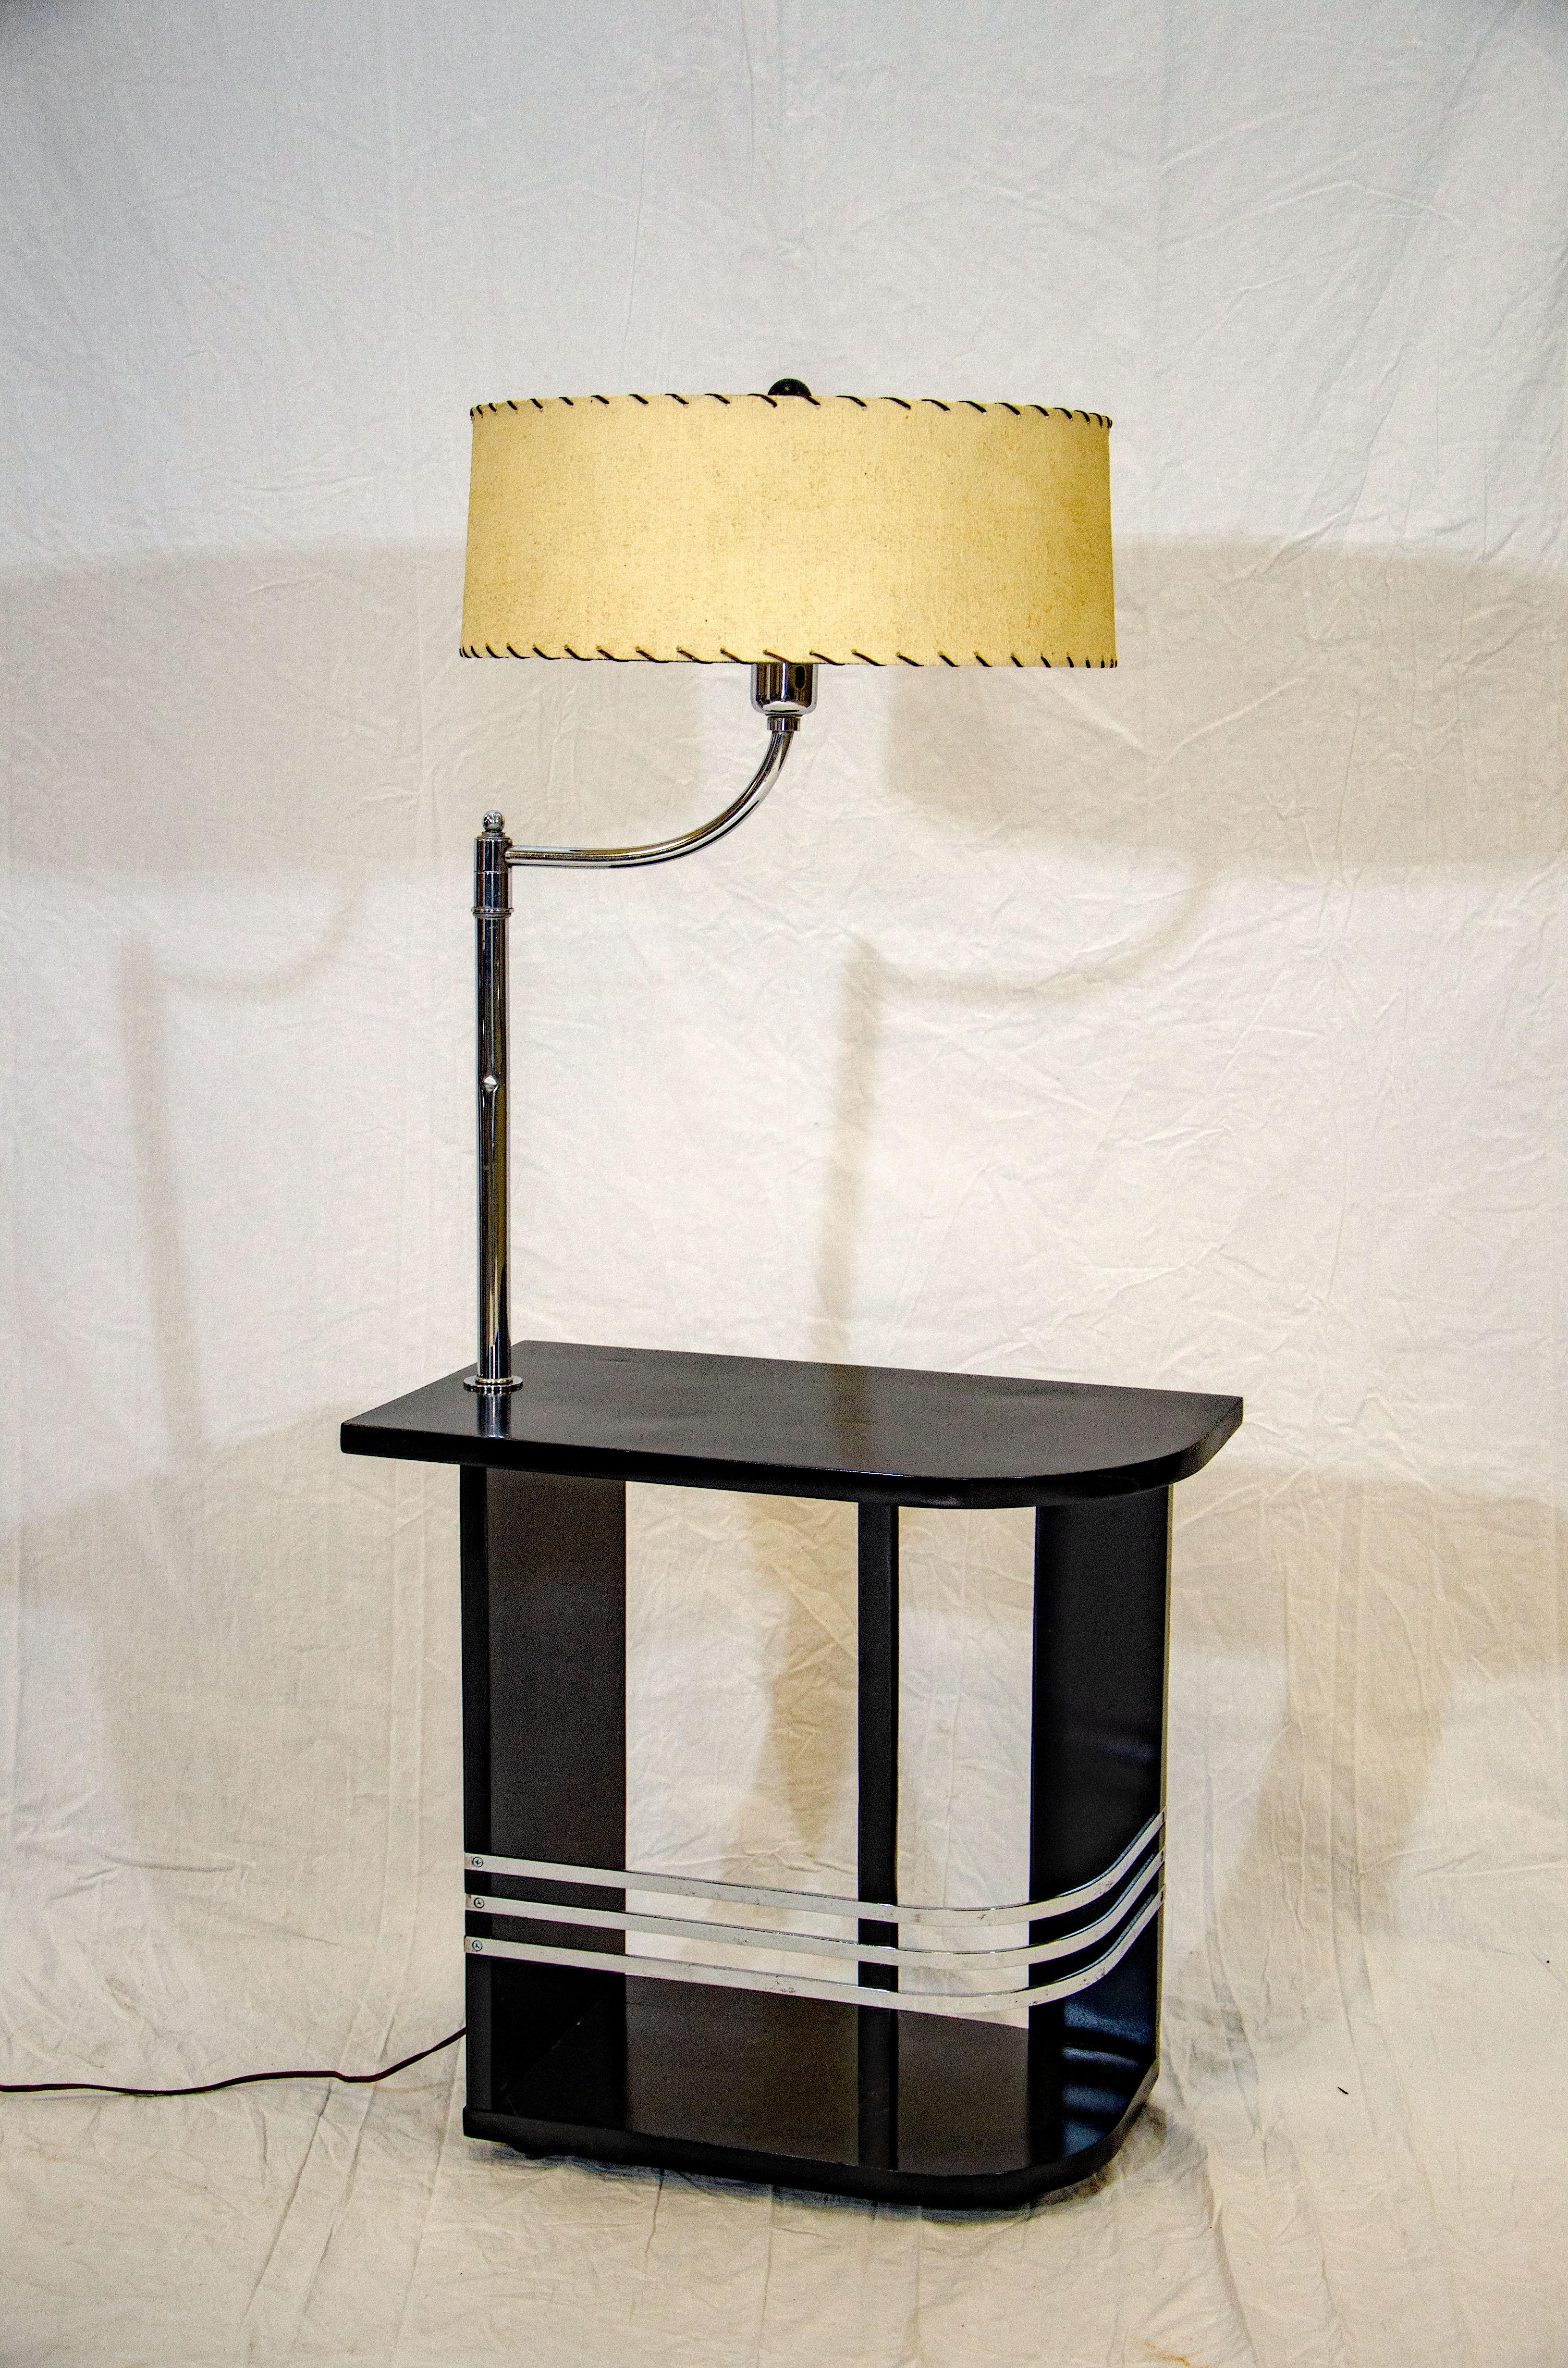 This nice Art Deco end table with a black finish is accented with three curved chrome bands and a chrome lamp. The tabletop is curved at one end. The lamp has a conical milk glass shade which holds a vintage circular shade with black lacing and a